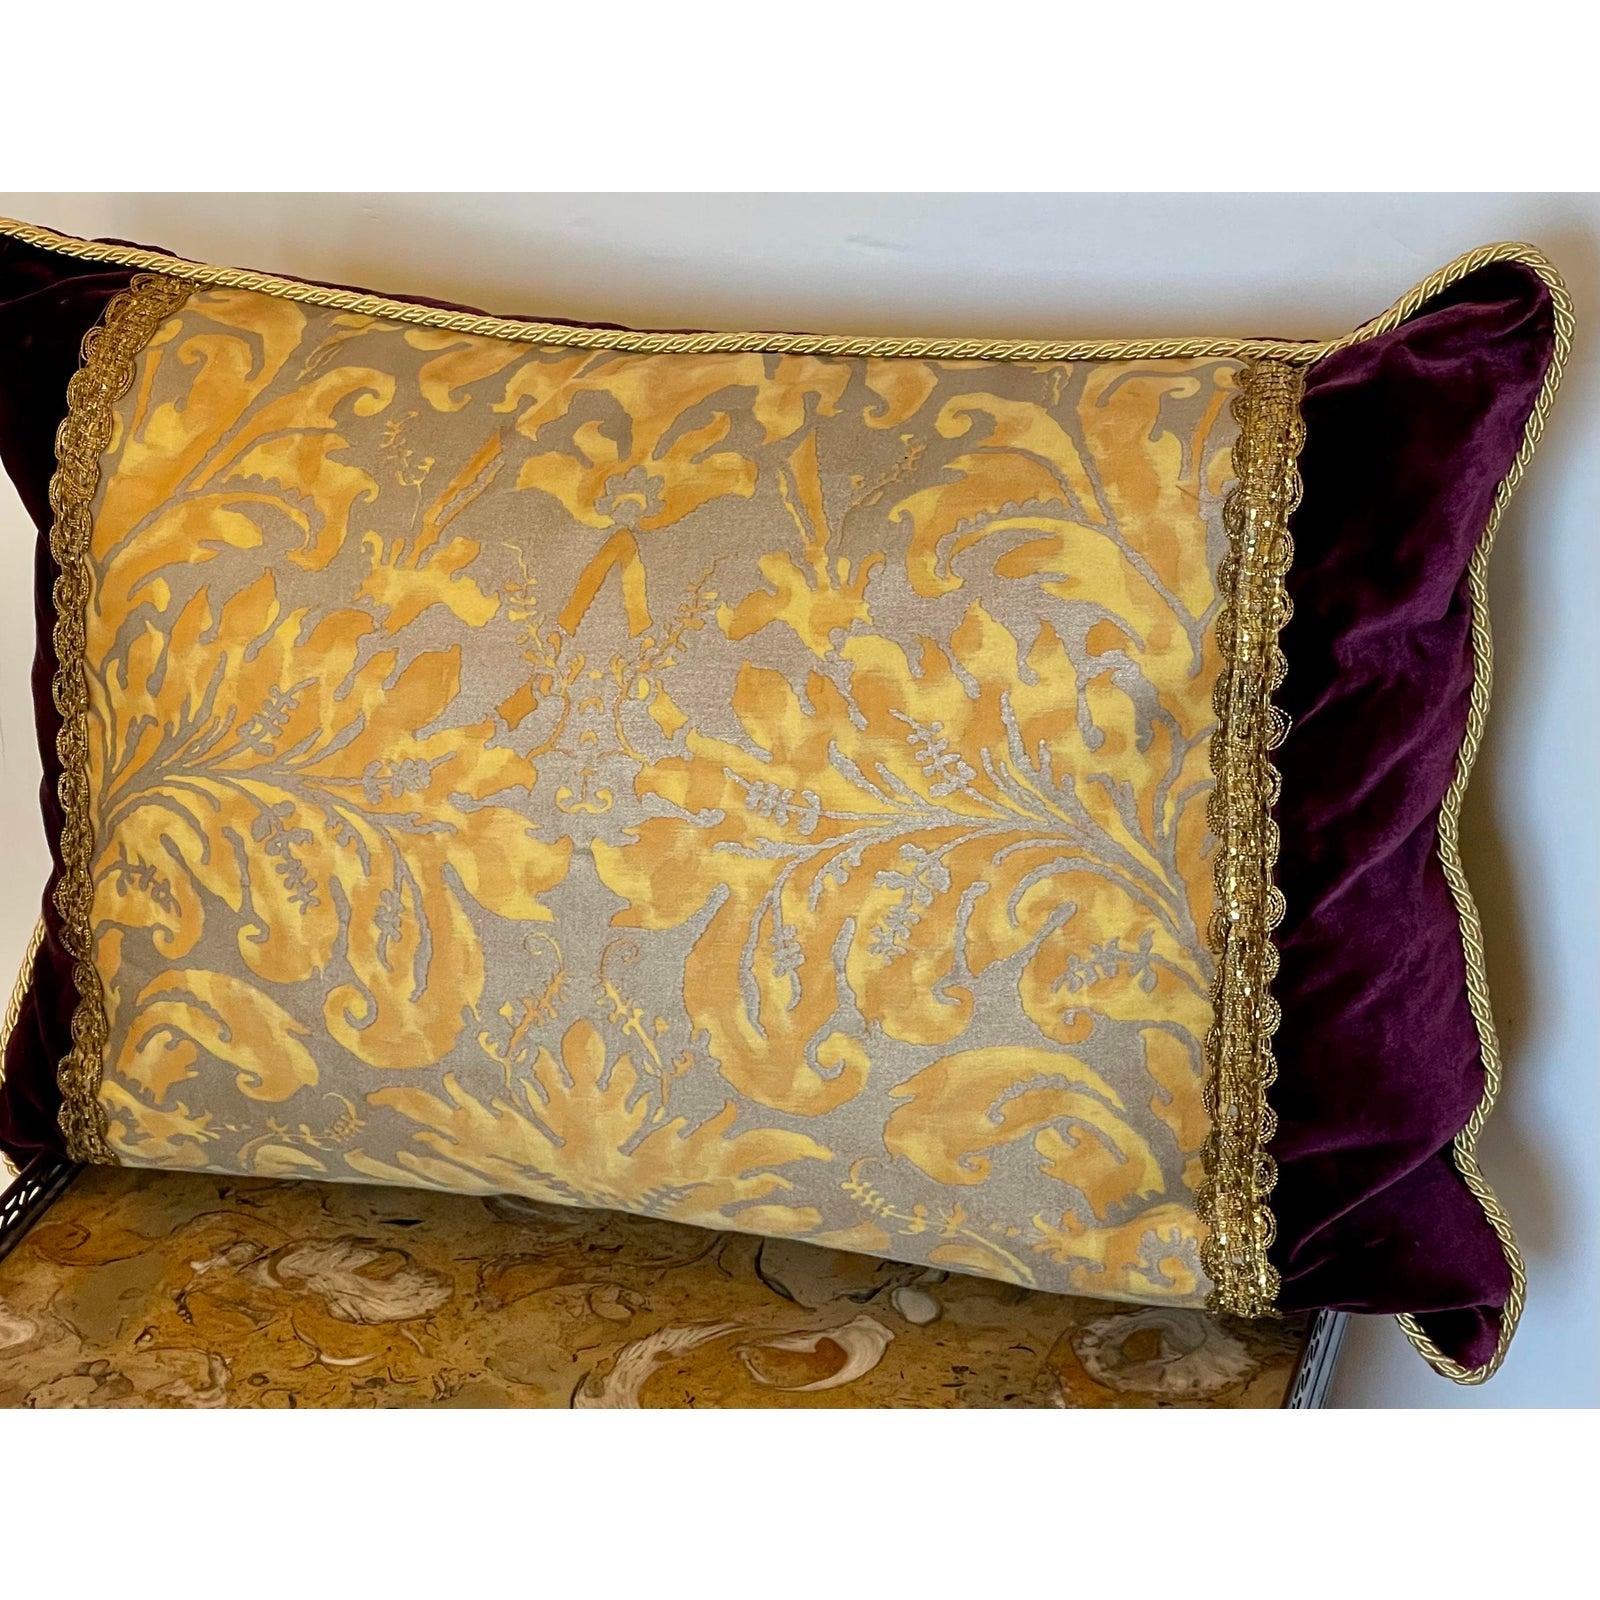 Vintage Fortuny down filled silk velvet throw pillow. With Gold Metallic Trim.

Additional information:
Materials: Silk, Velvet
Color: Purple
Designer: Fortuny
Period: 2000 - 2009
Pattern: Damask
Styles: French, Italian, Renaissance
Item